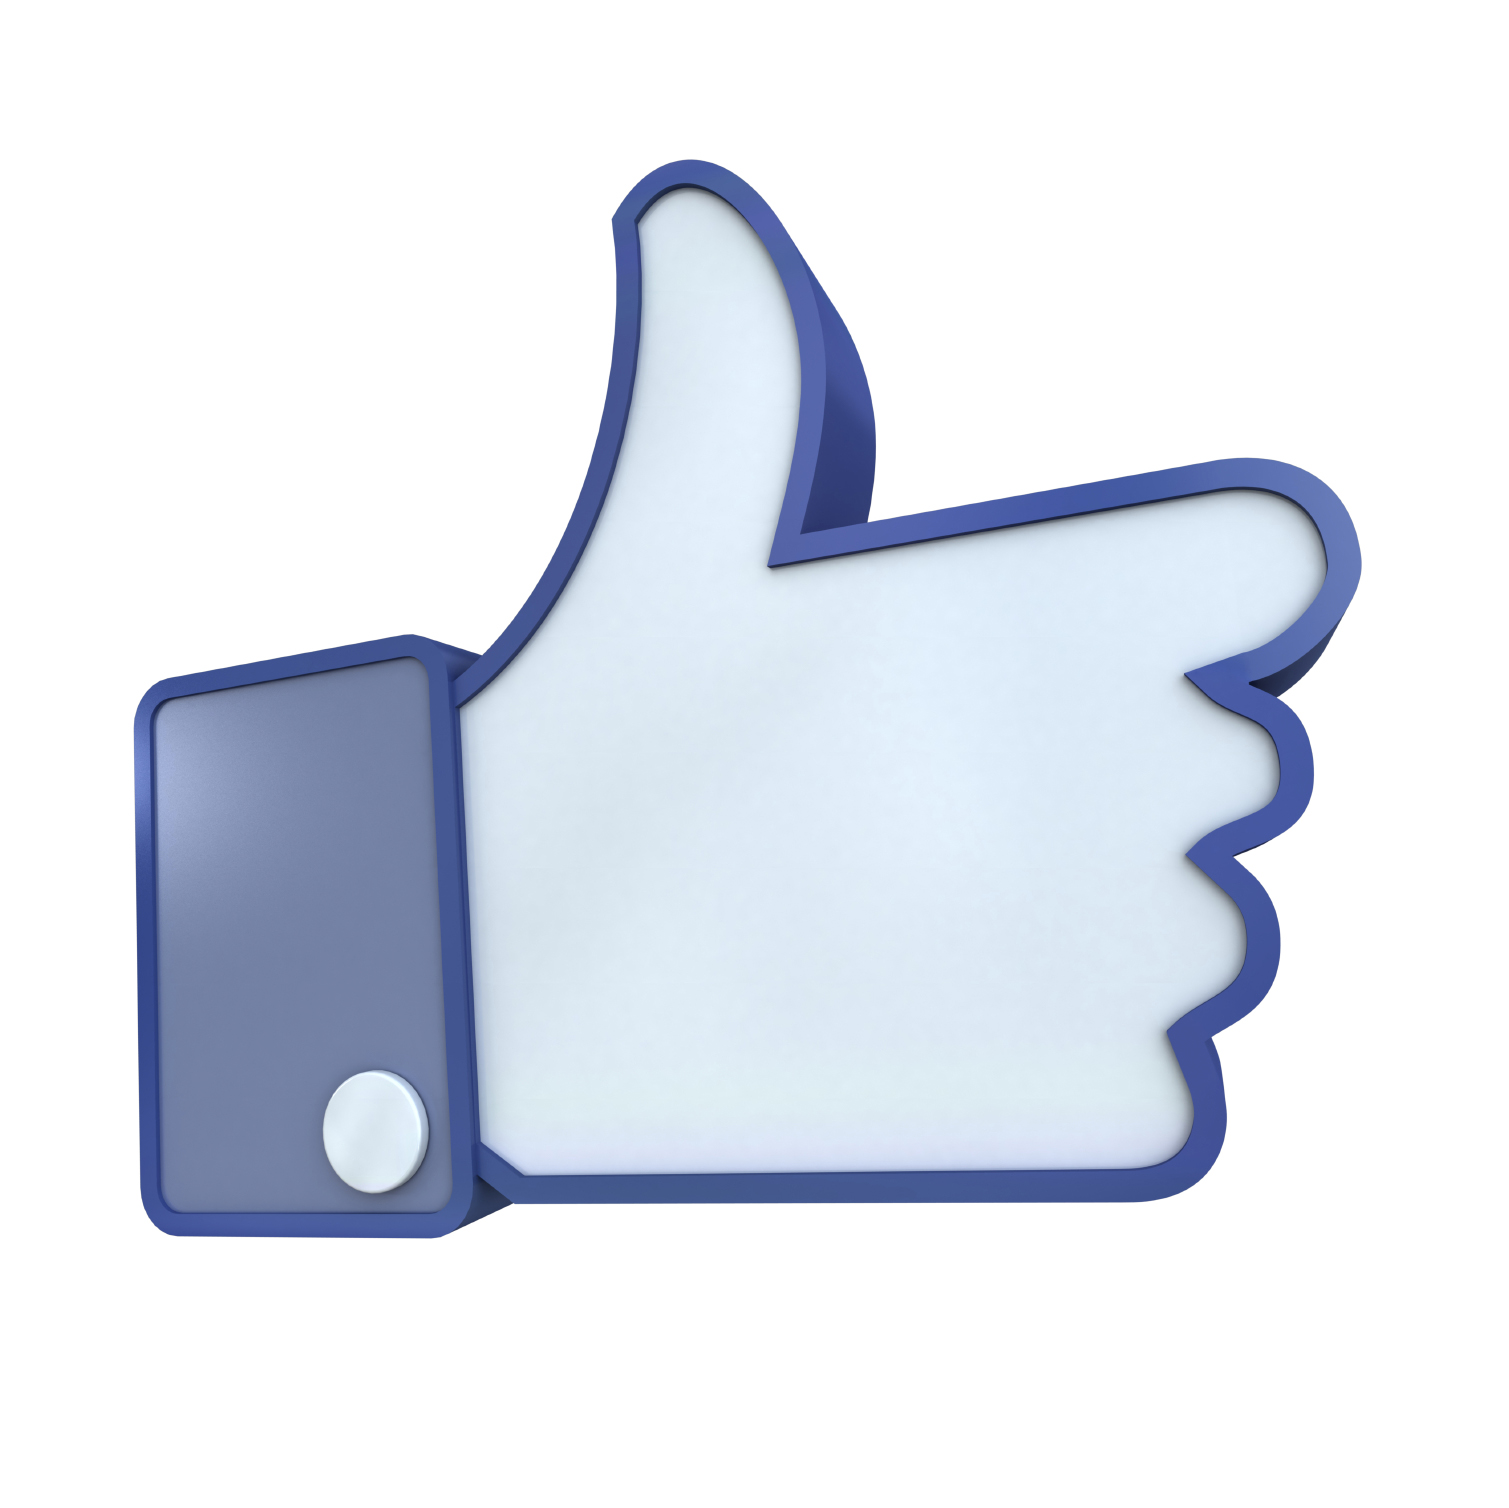 Facebook thumbs up clipart